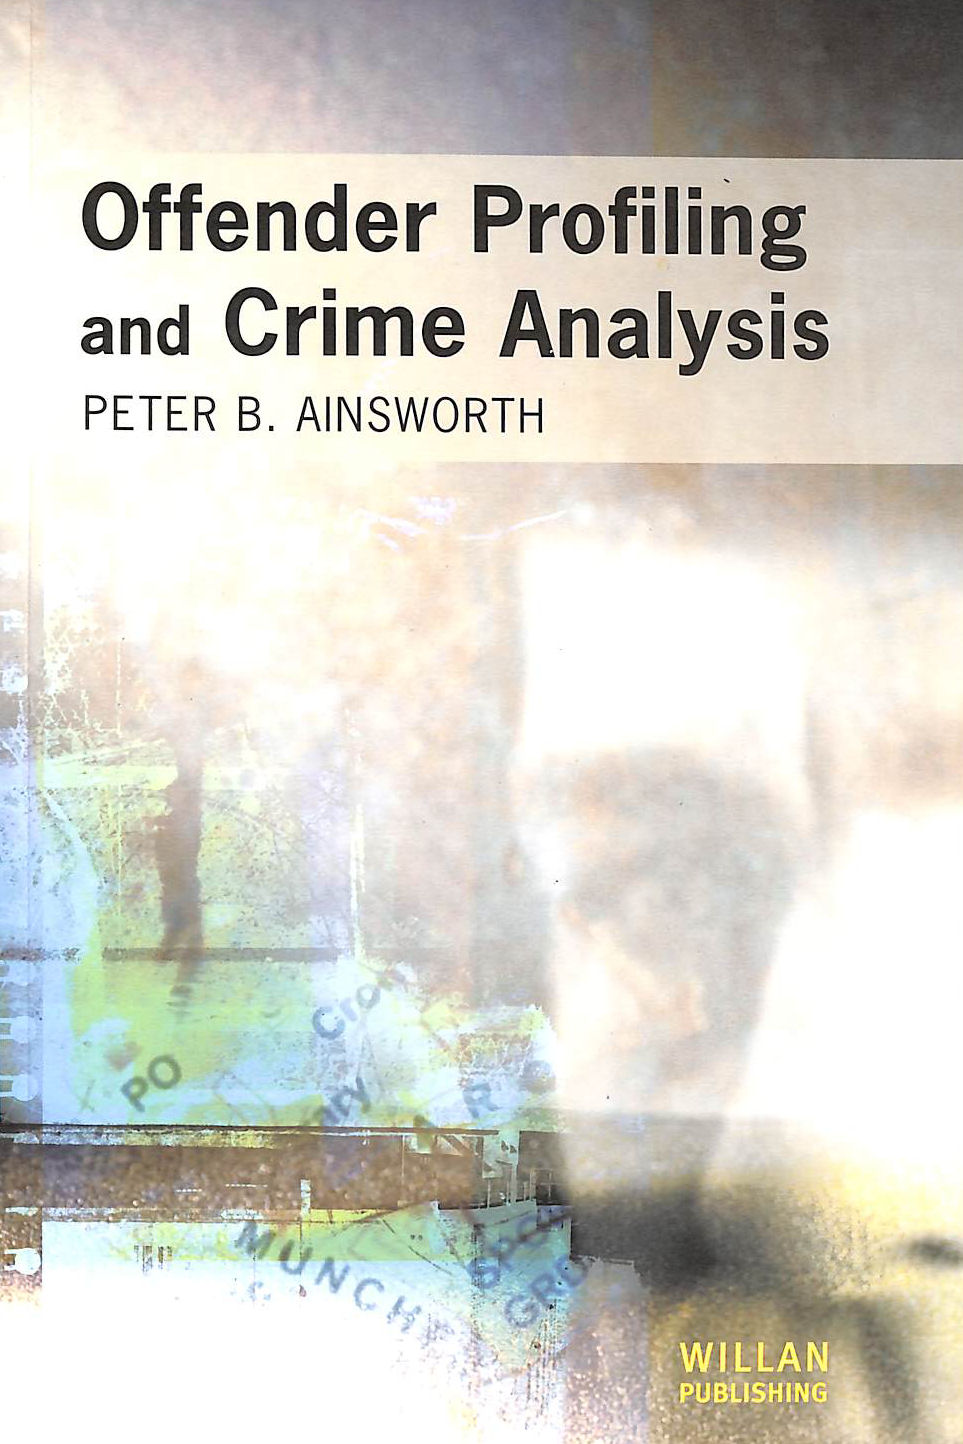 AINSWORTH, PETER - Offender Profiling and Crime Analysis